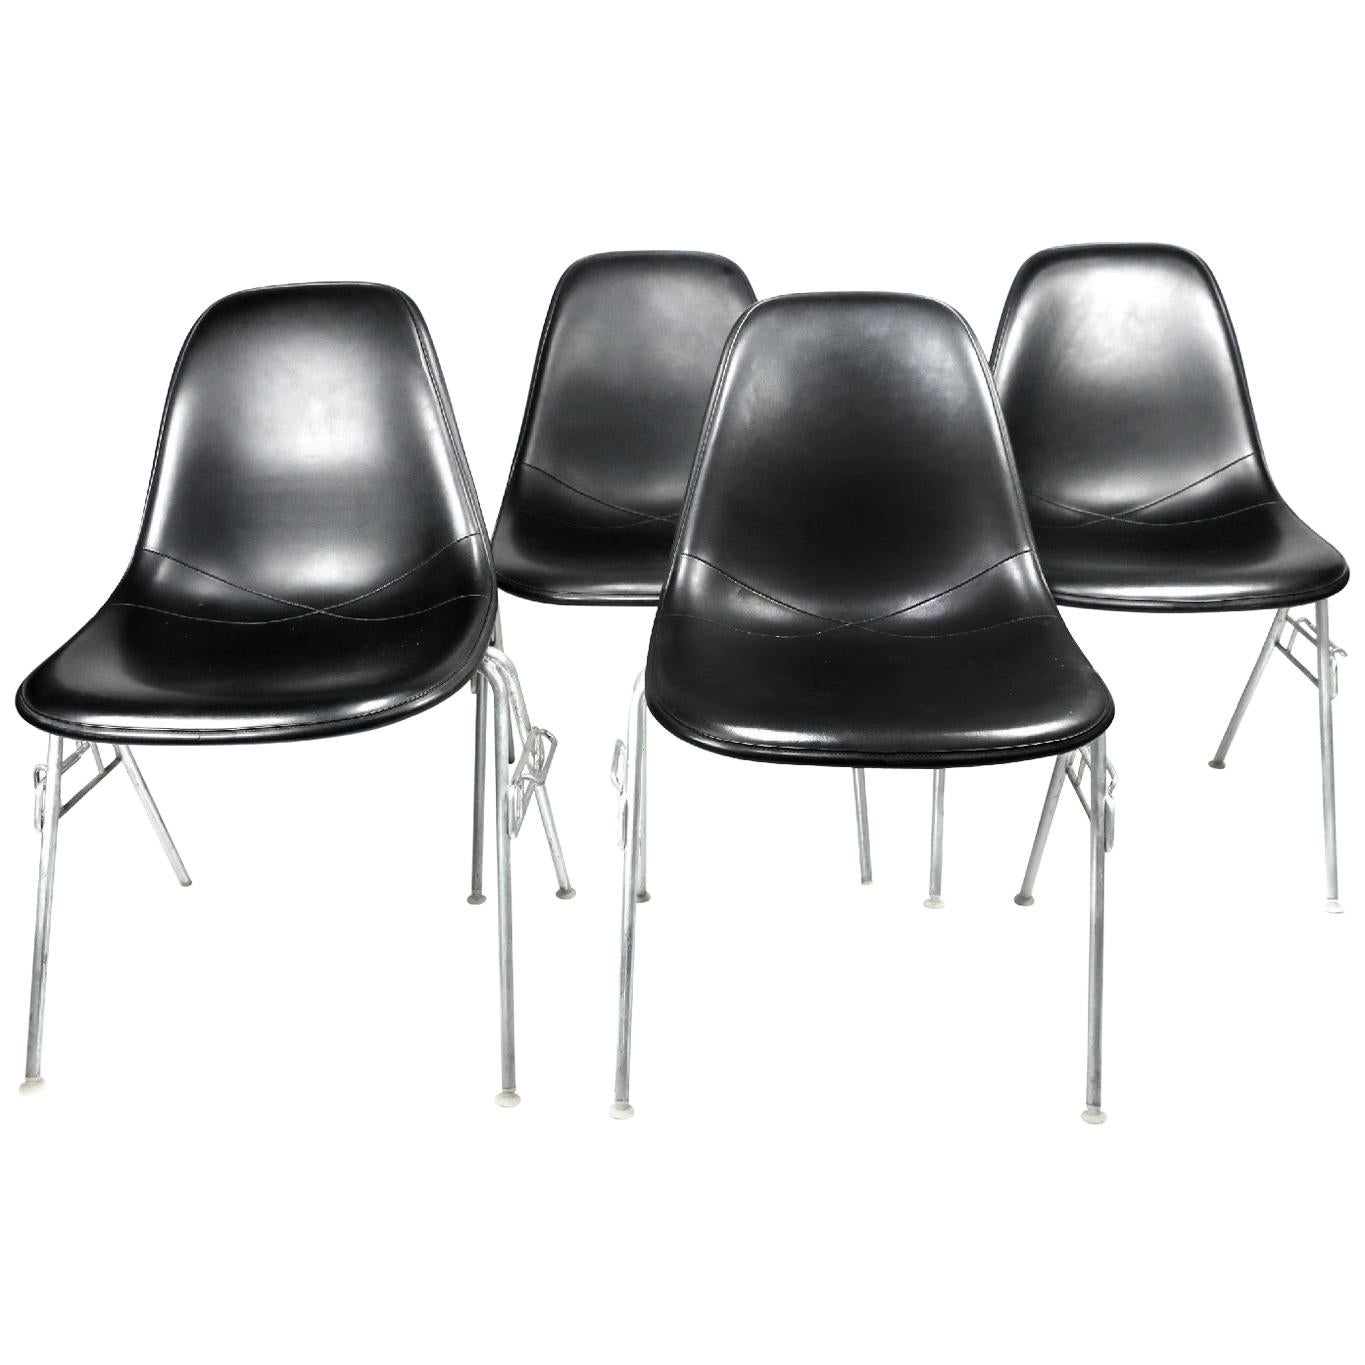 Black Upholstered Eames Stacking Chairs for Herman Miller, Set of Four